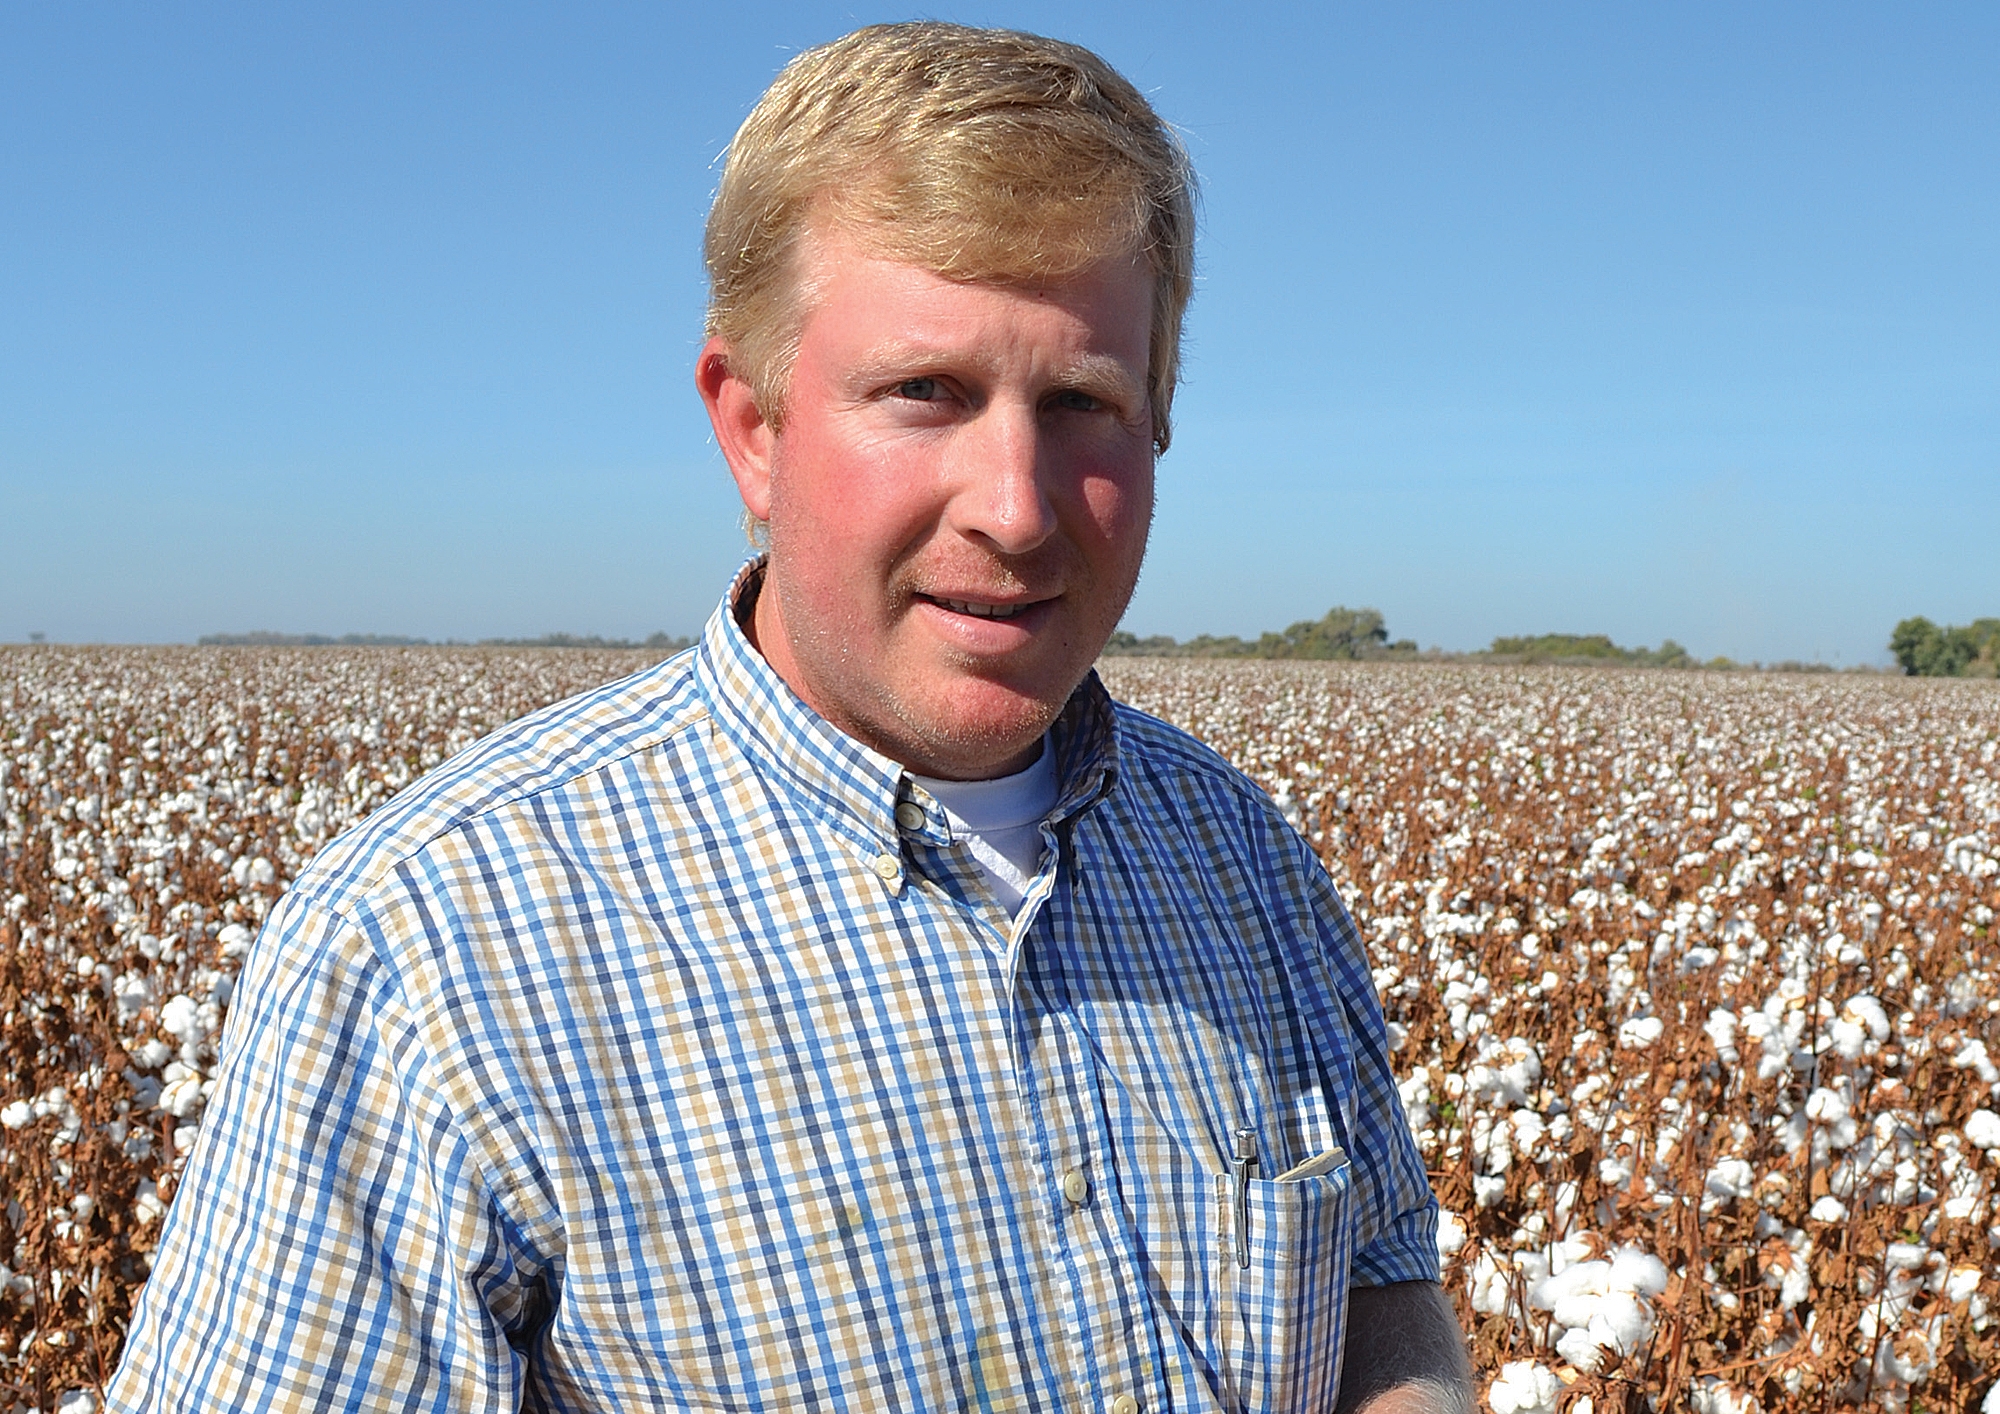 Mid Season Pest Management in Cotton, 2012 Style - IPM in field